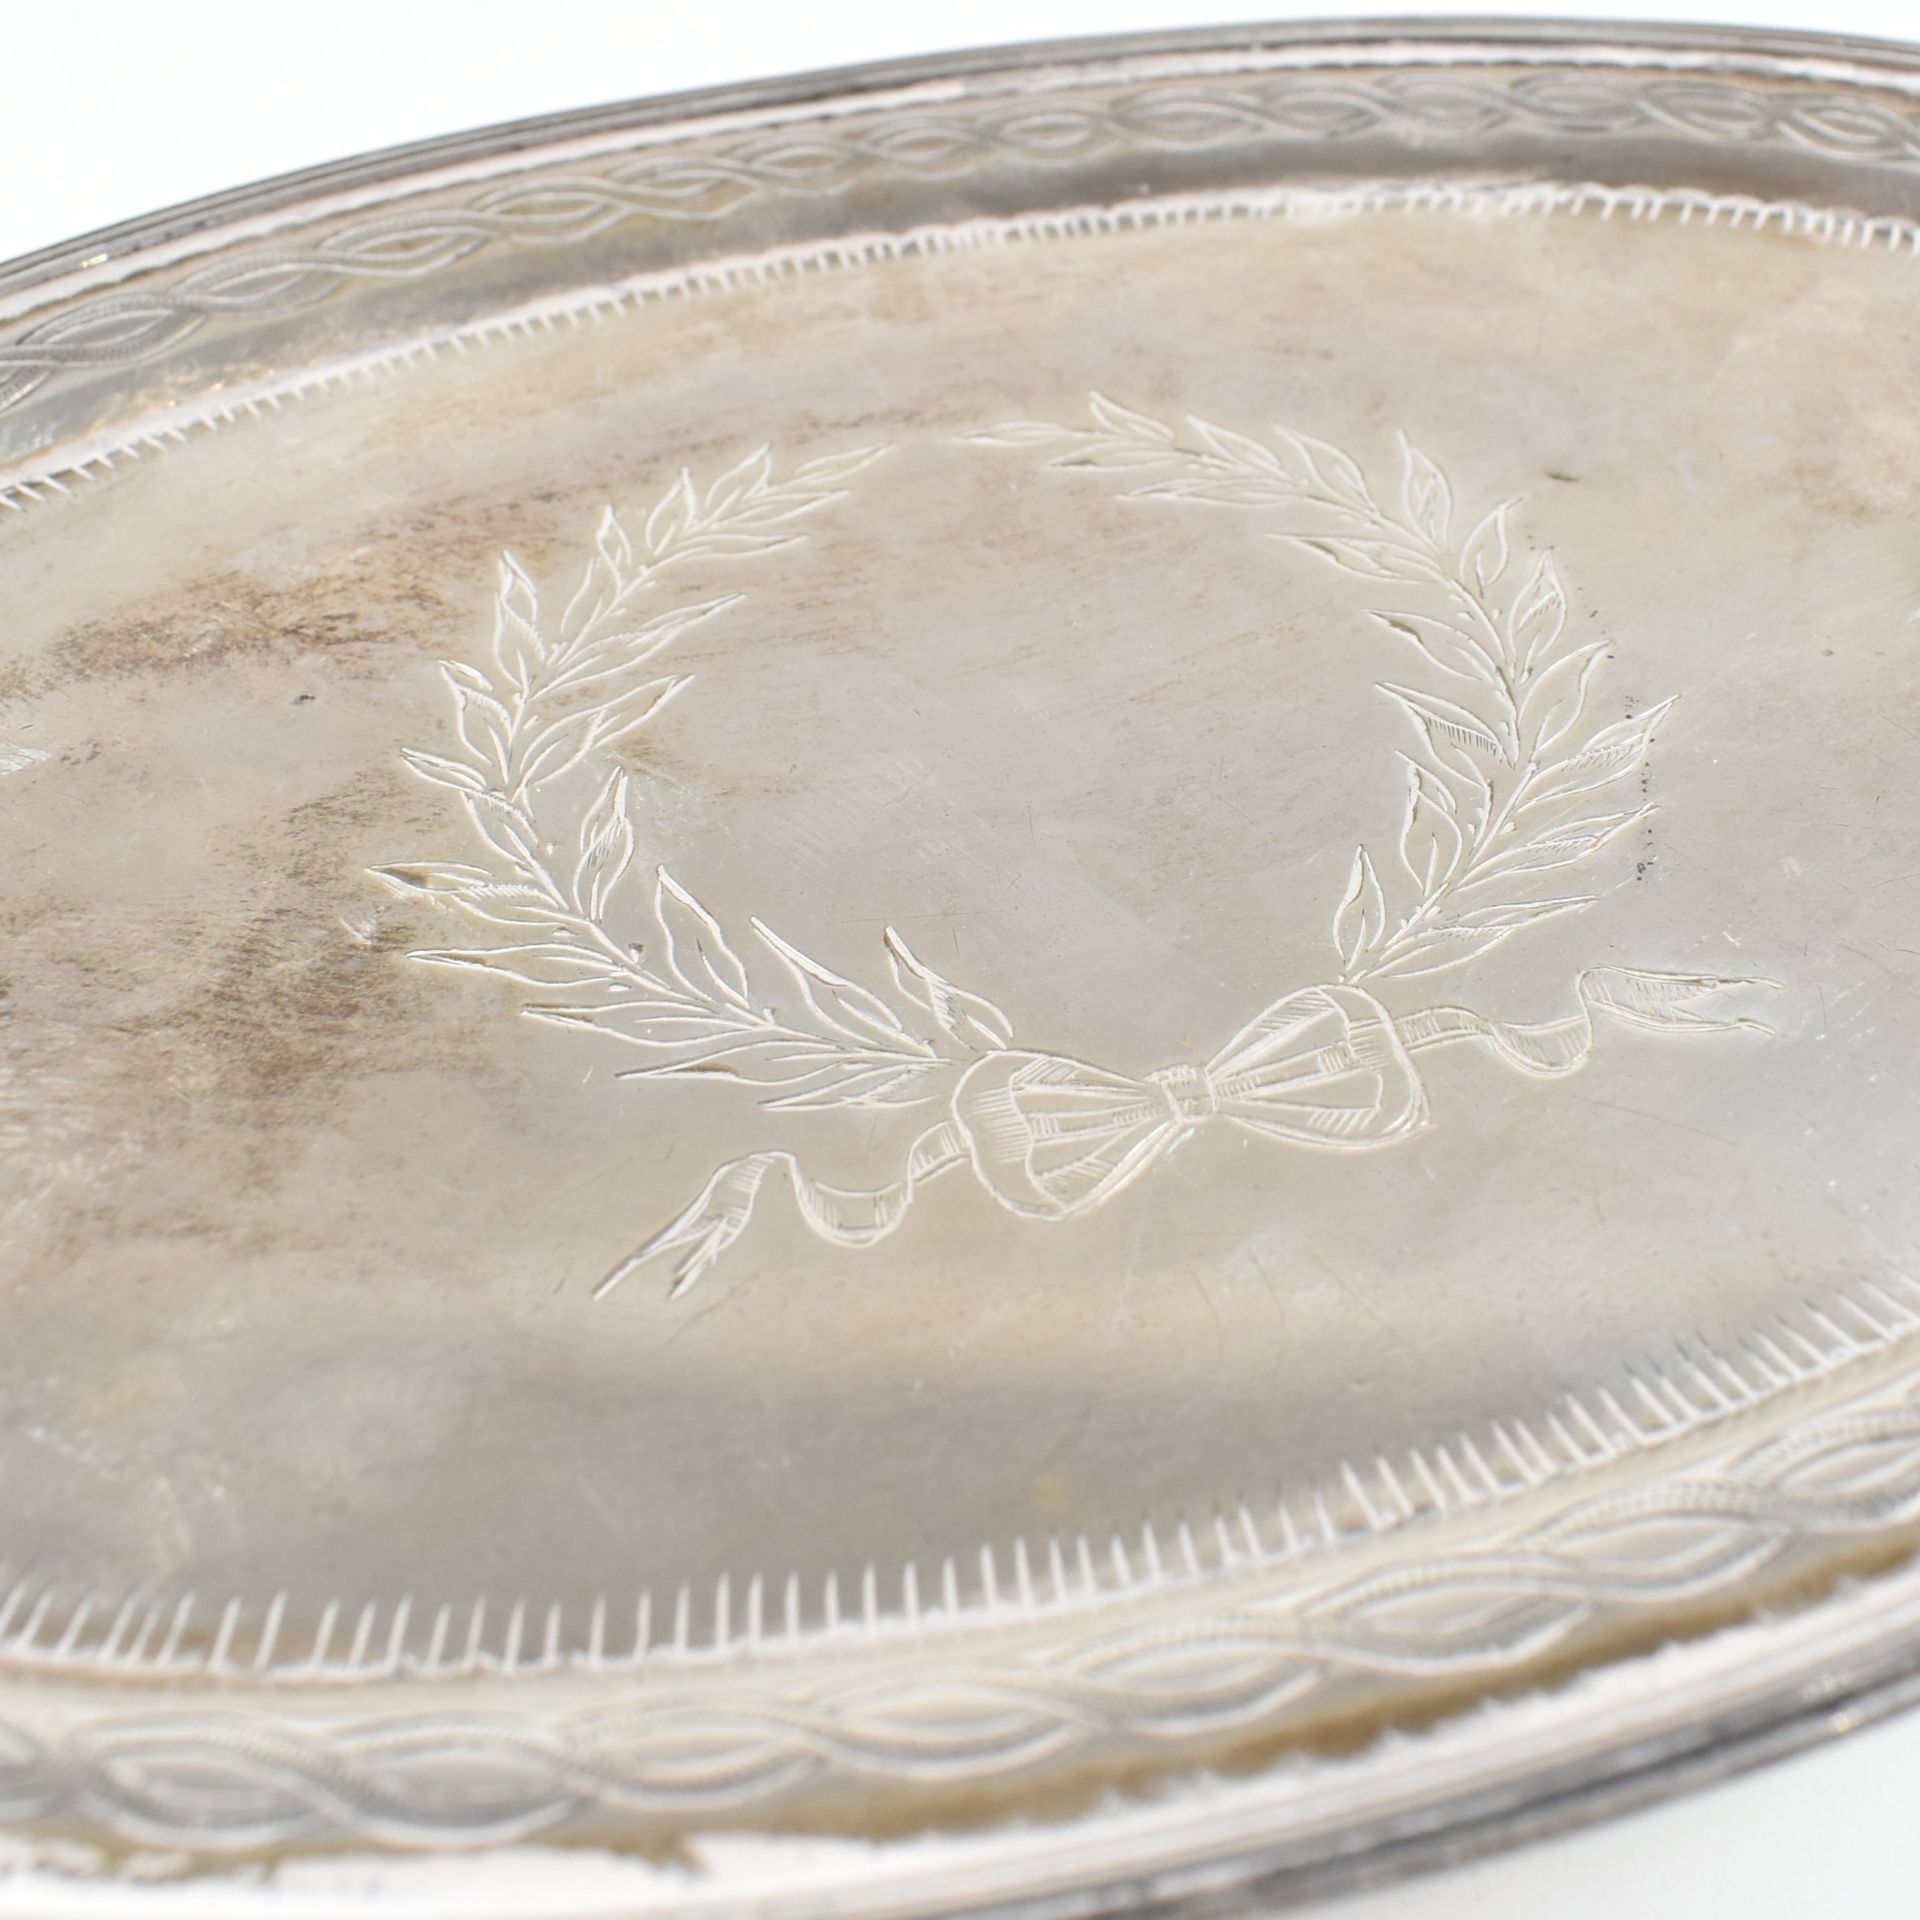 GEORGE V HALLMARKED SILVER TRAY - Image 4 of 8